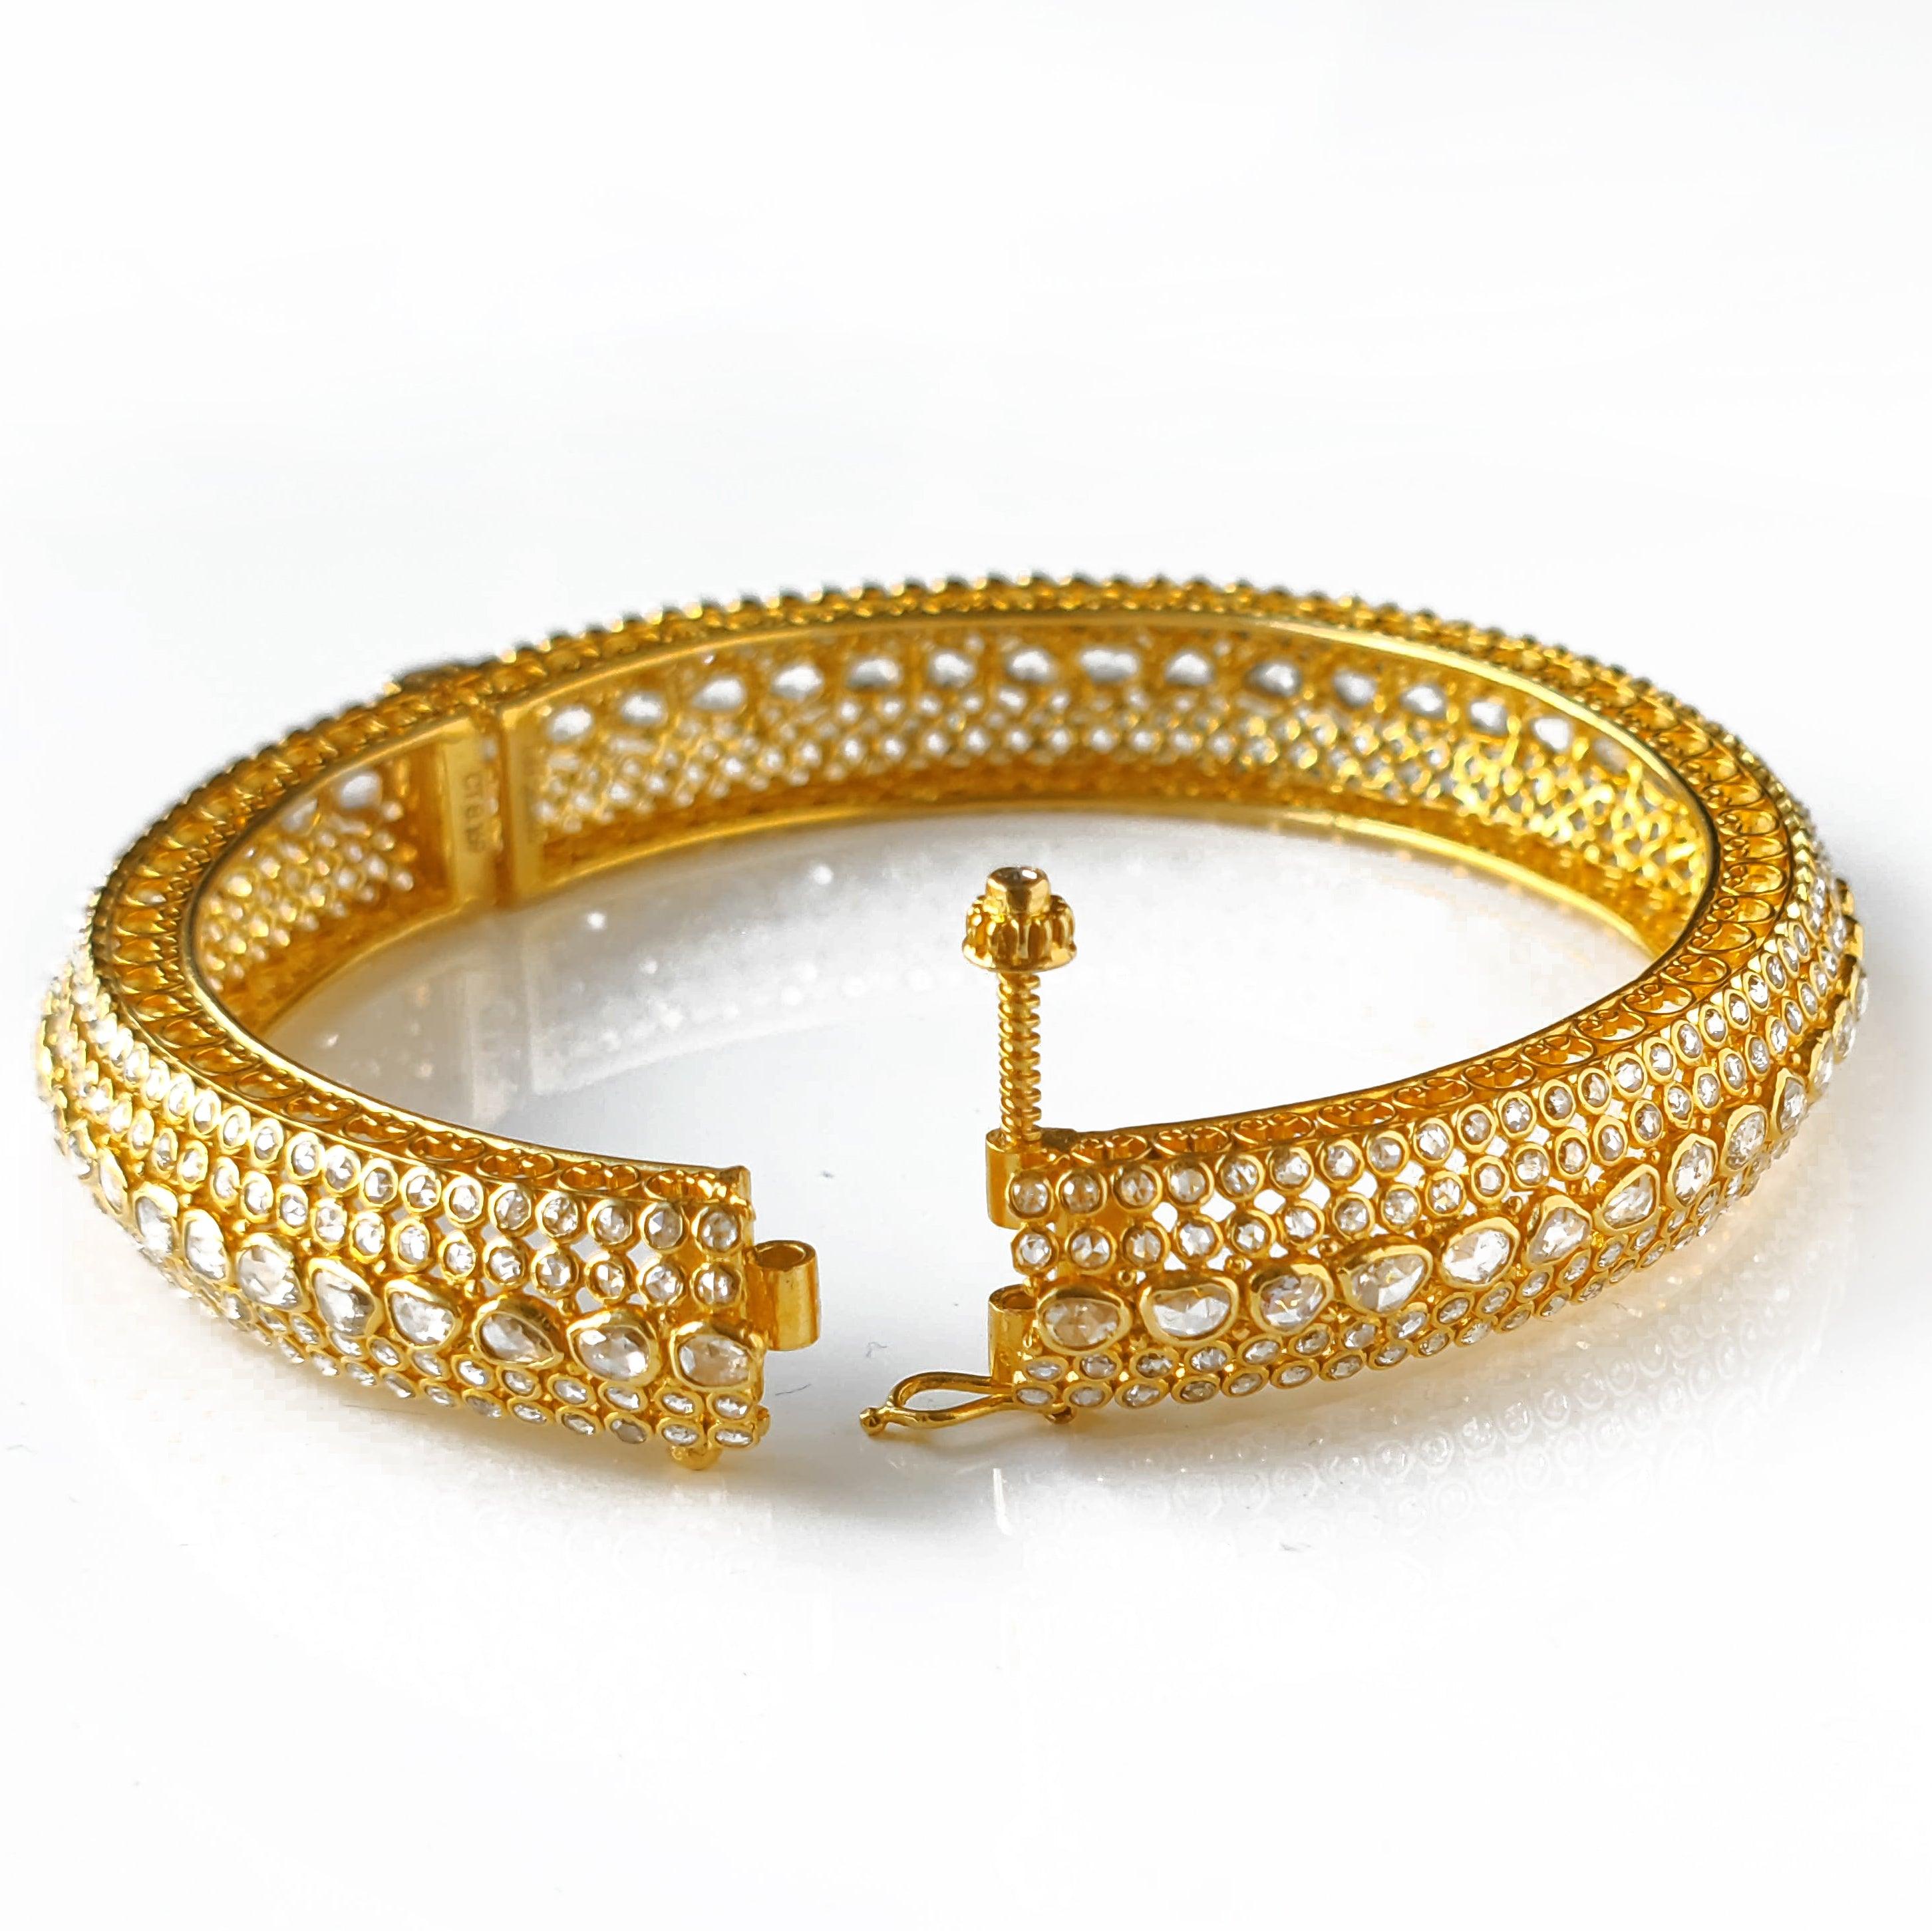 Openable 22ct Gold Champagne Bangle with Screw Lock (30.6g) B-8196 - Minar Jewellers